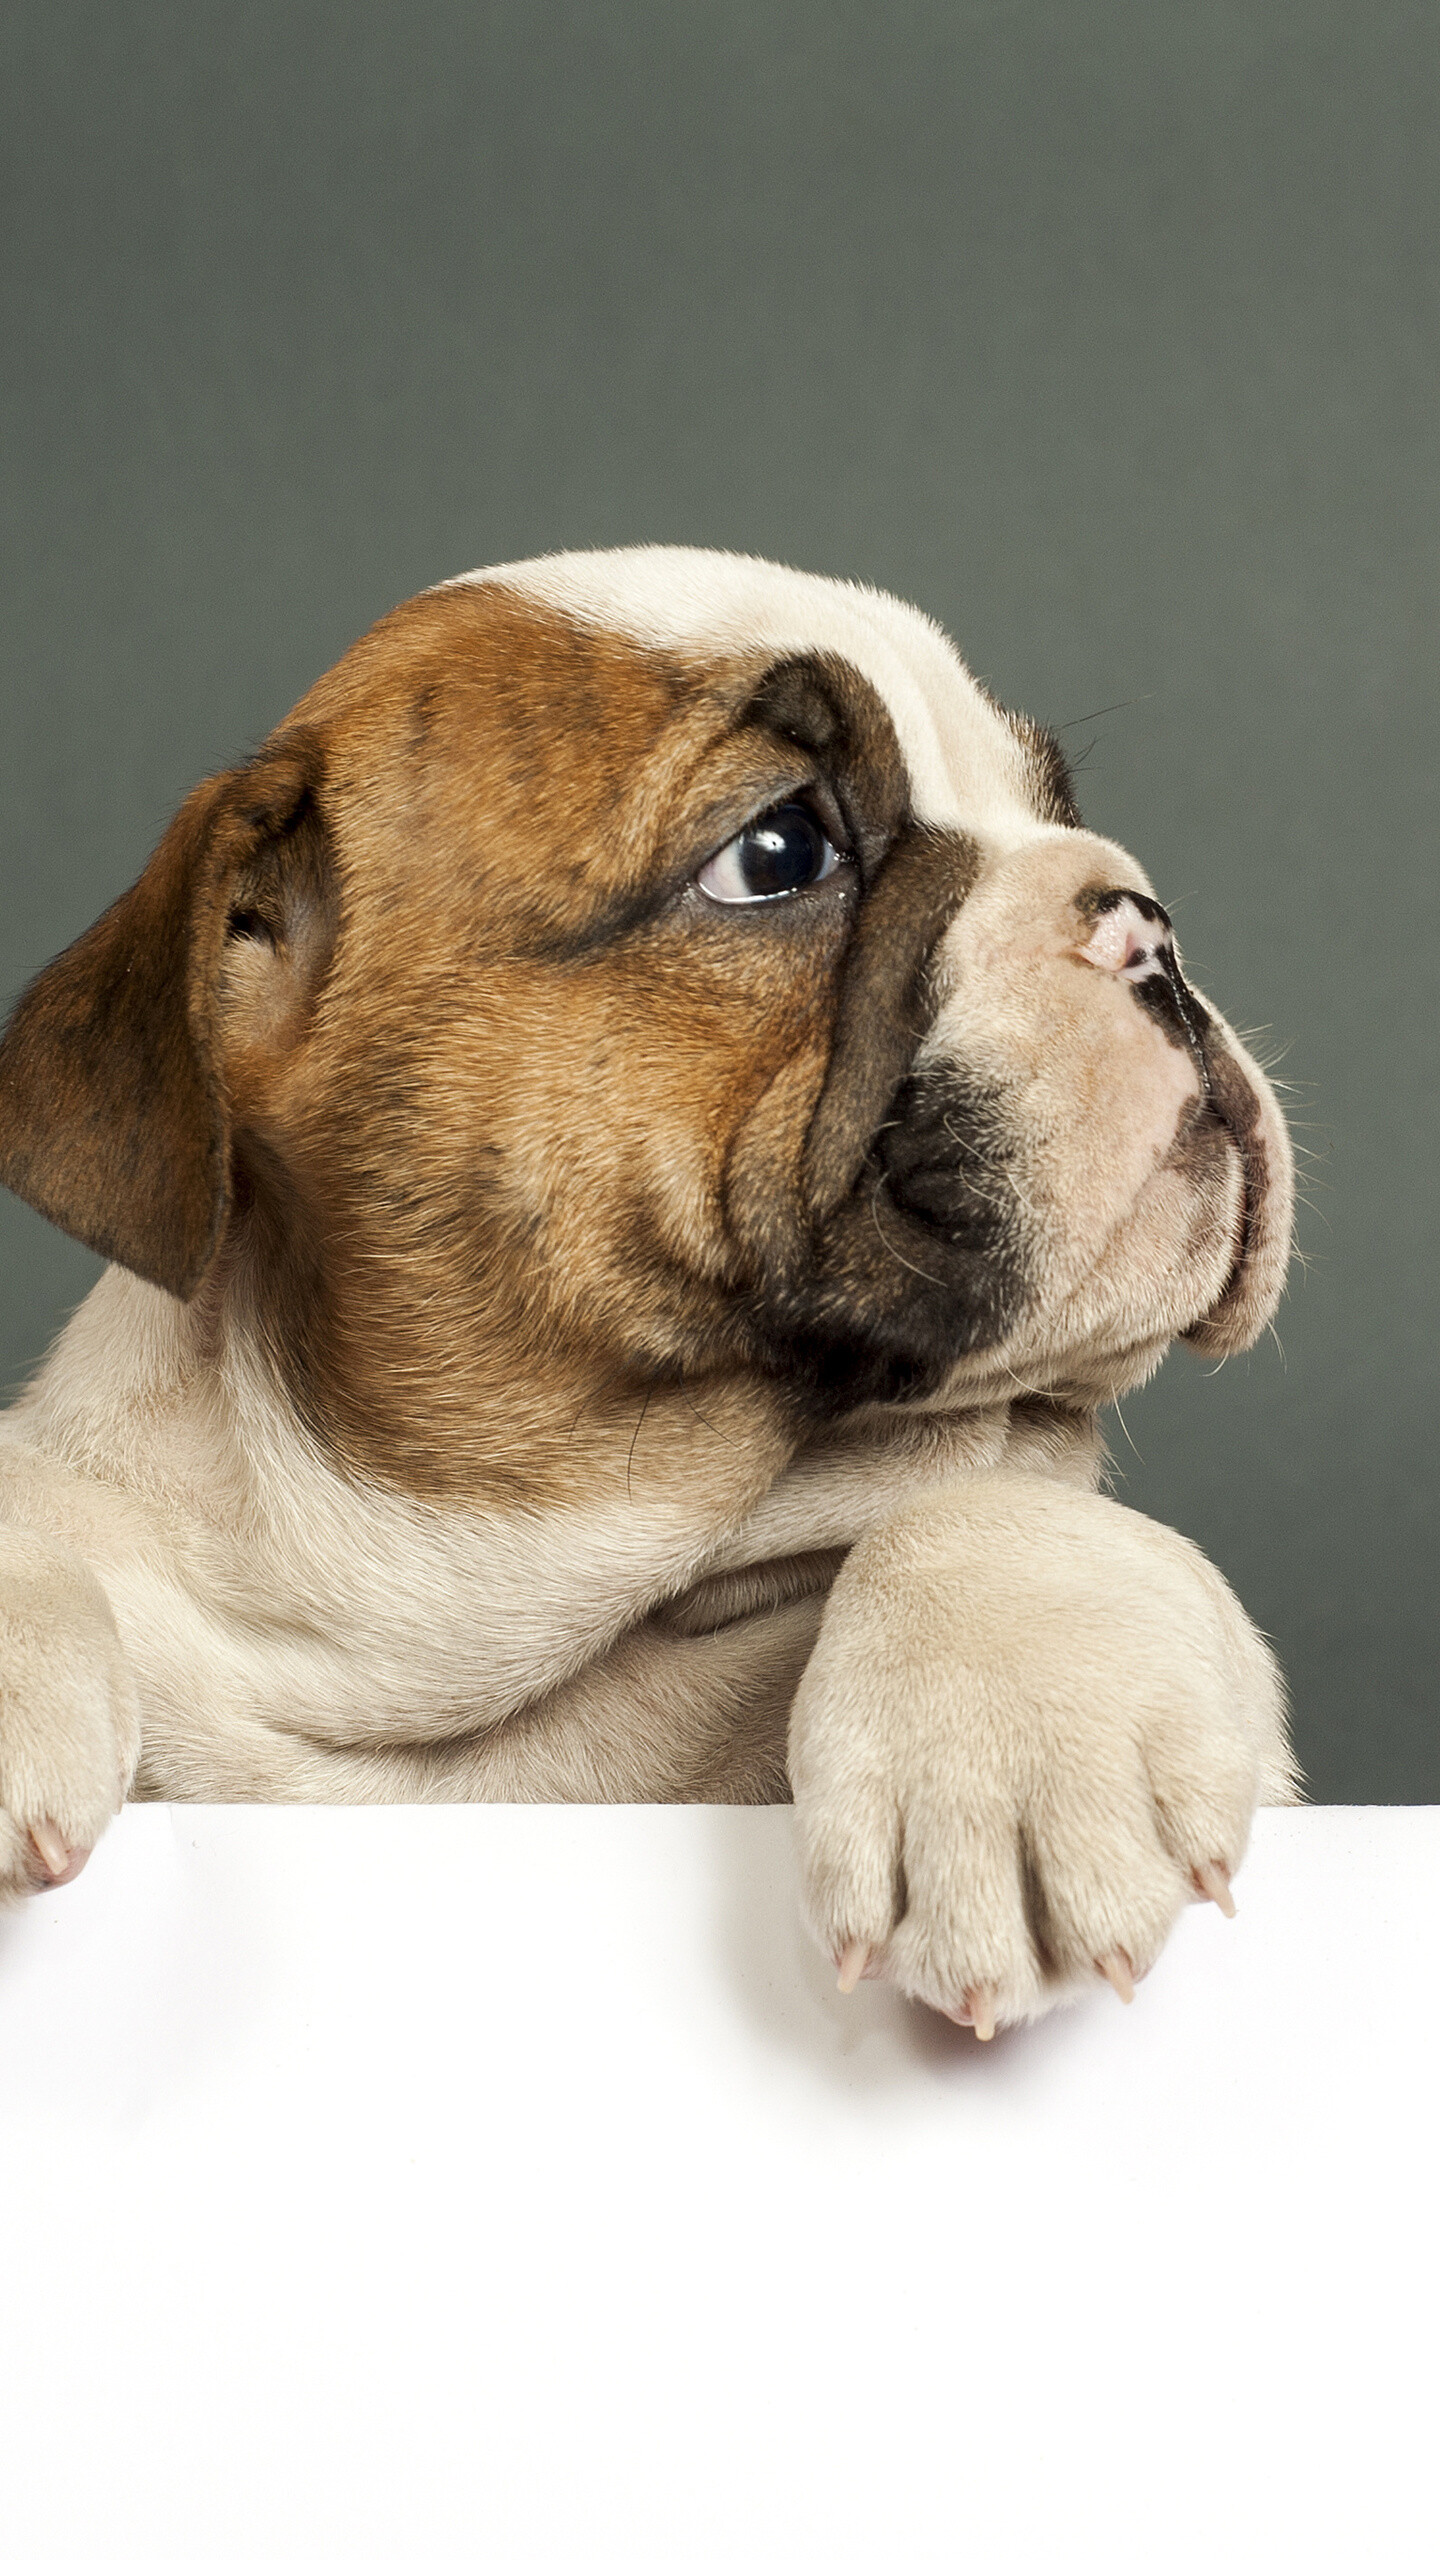 Puppy: Bulldog, commonly kept as a companion dog. 1440x2560 HD Background.